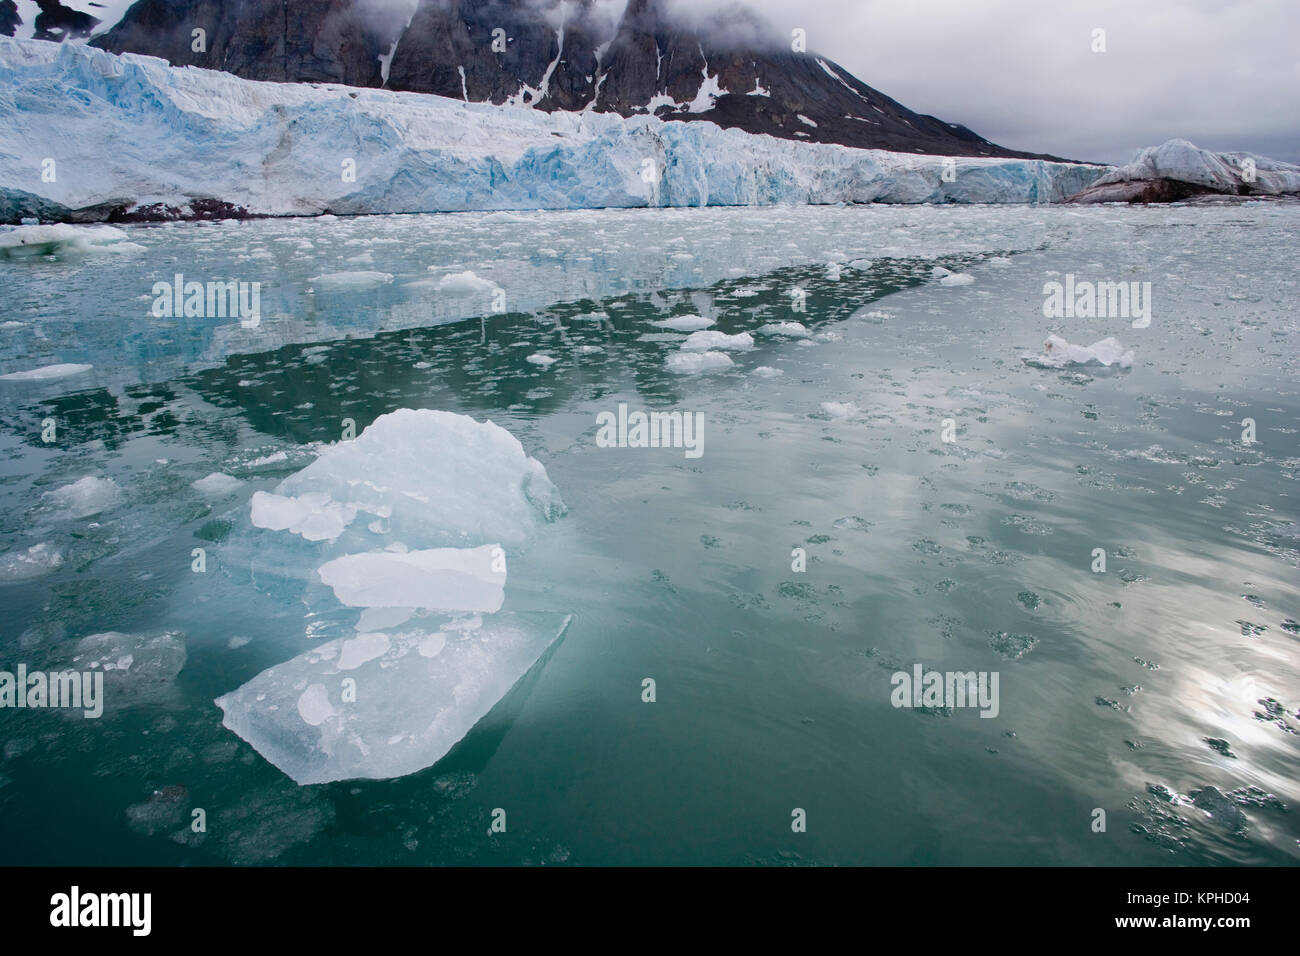 Small ice pieces drifting in fiord near glacier, June, dark and cloudy sky Stock Photo